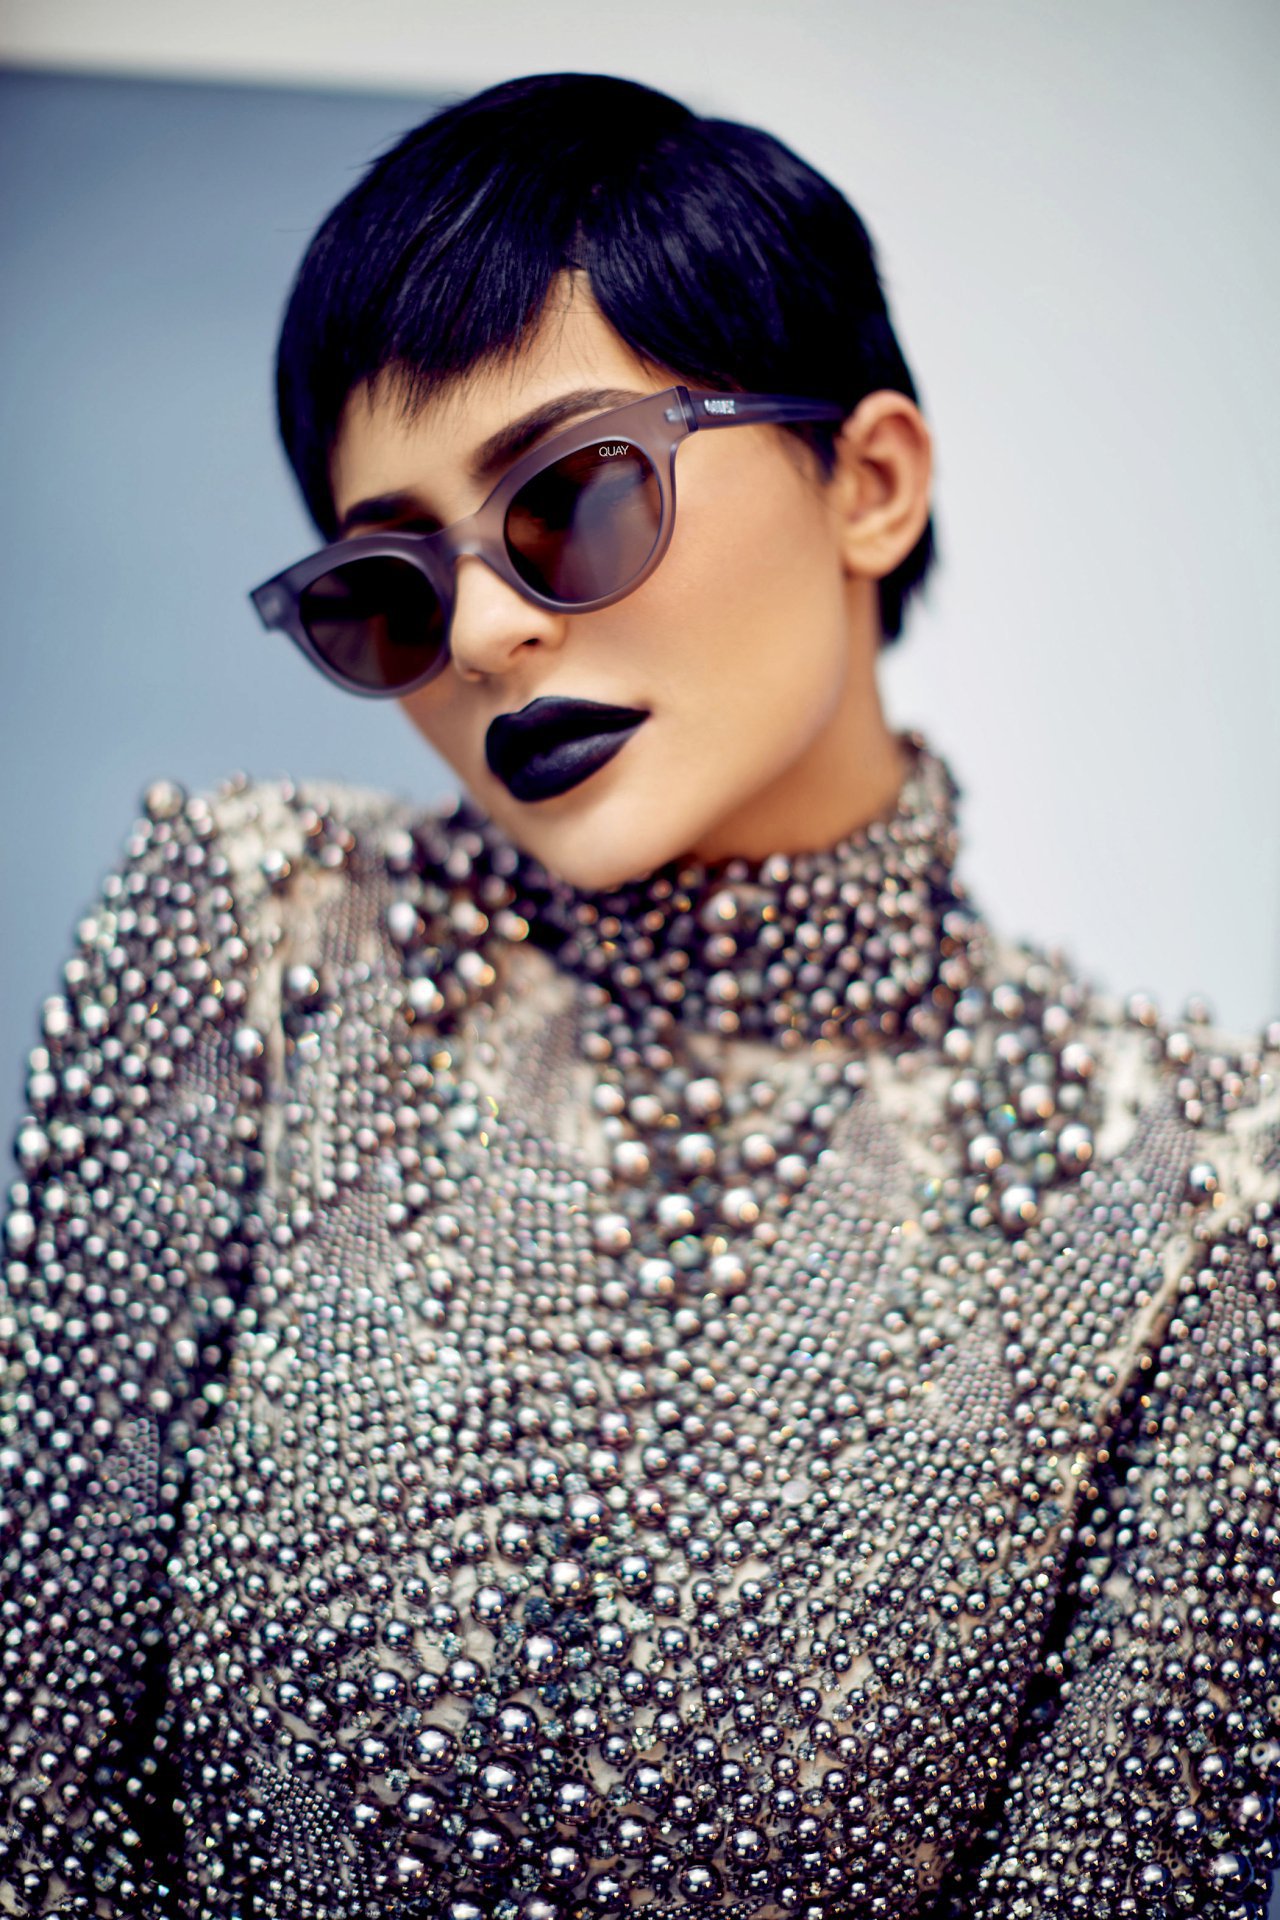 Kylie Jenner X Quay Sunglasses collaboration revealed